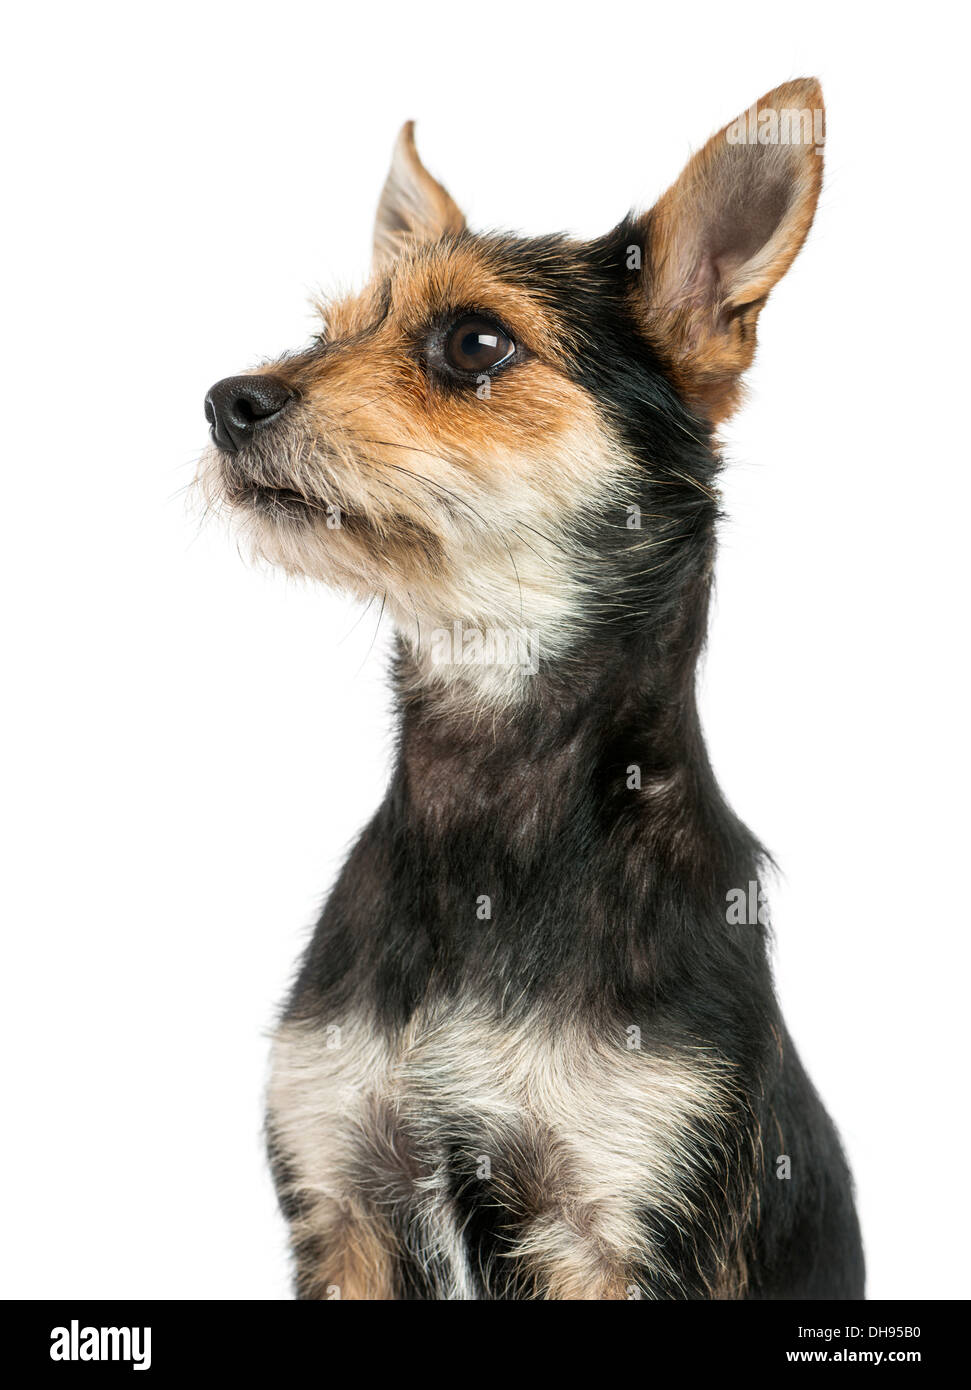 Close-up of a Crossbreed dog's profile against white background Stock Photo